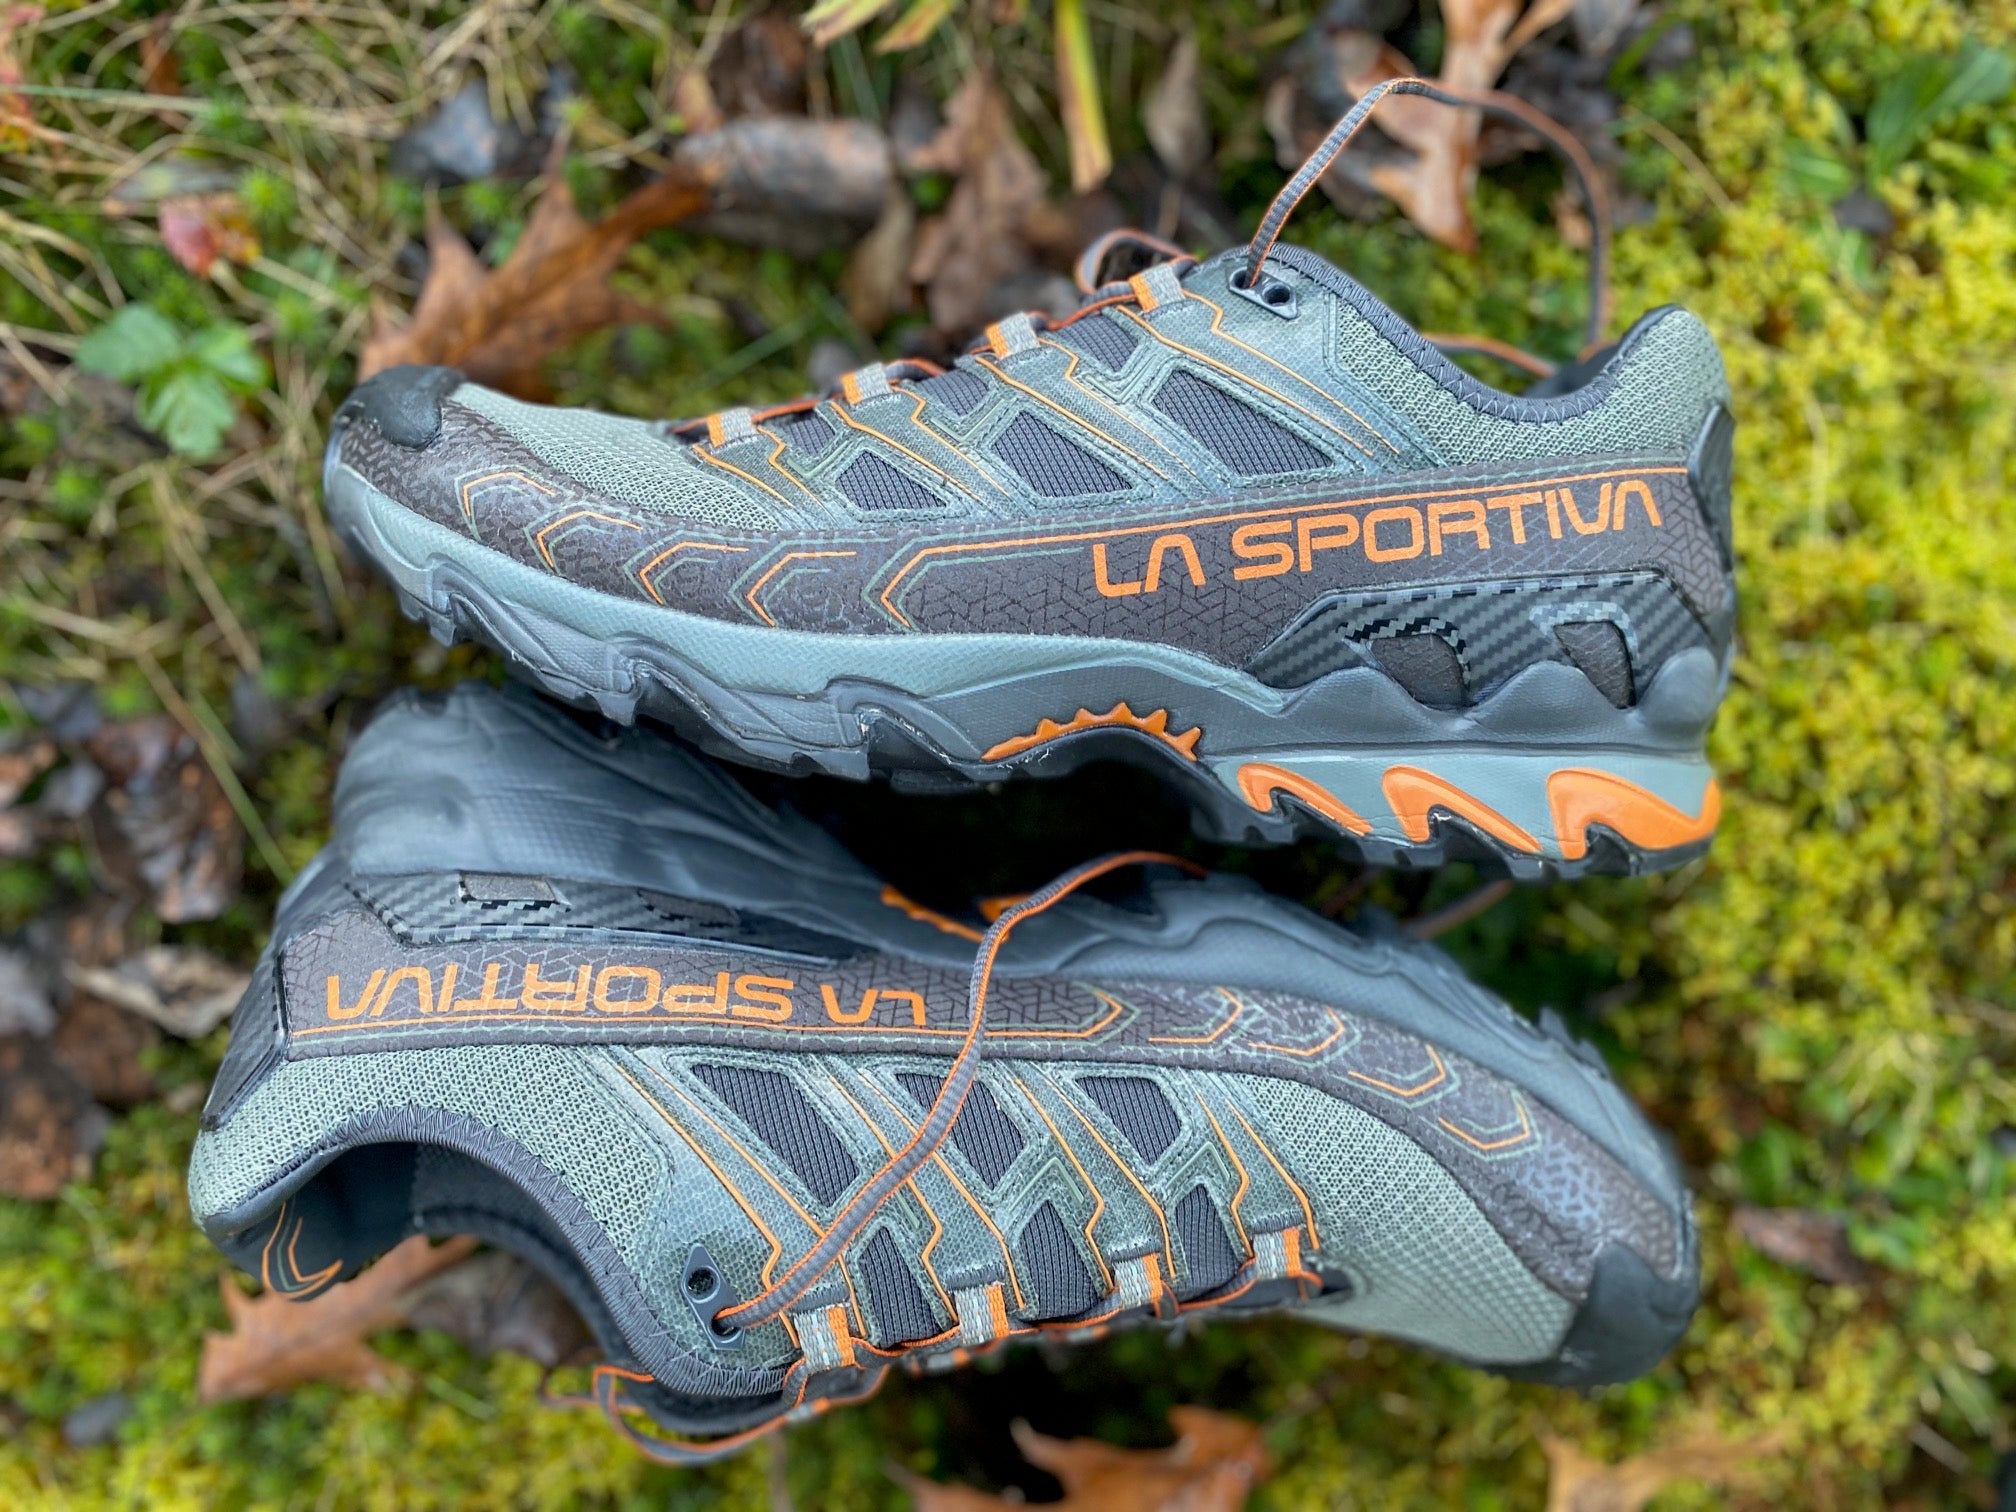 The Ultra Rapid II hiking shoes are supportive and come in three different color patterns.